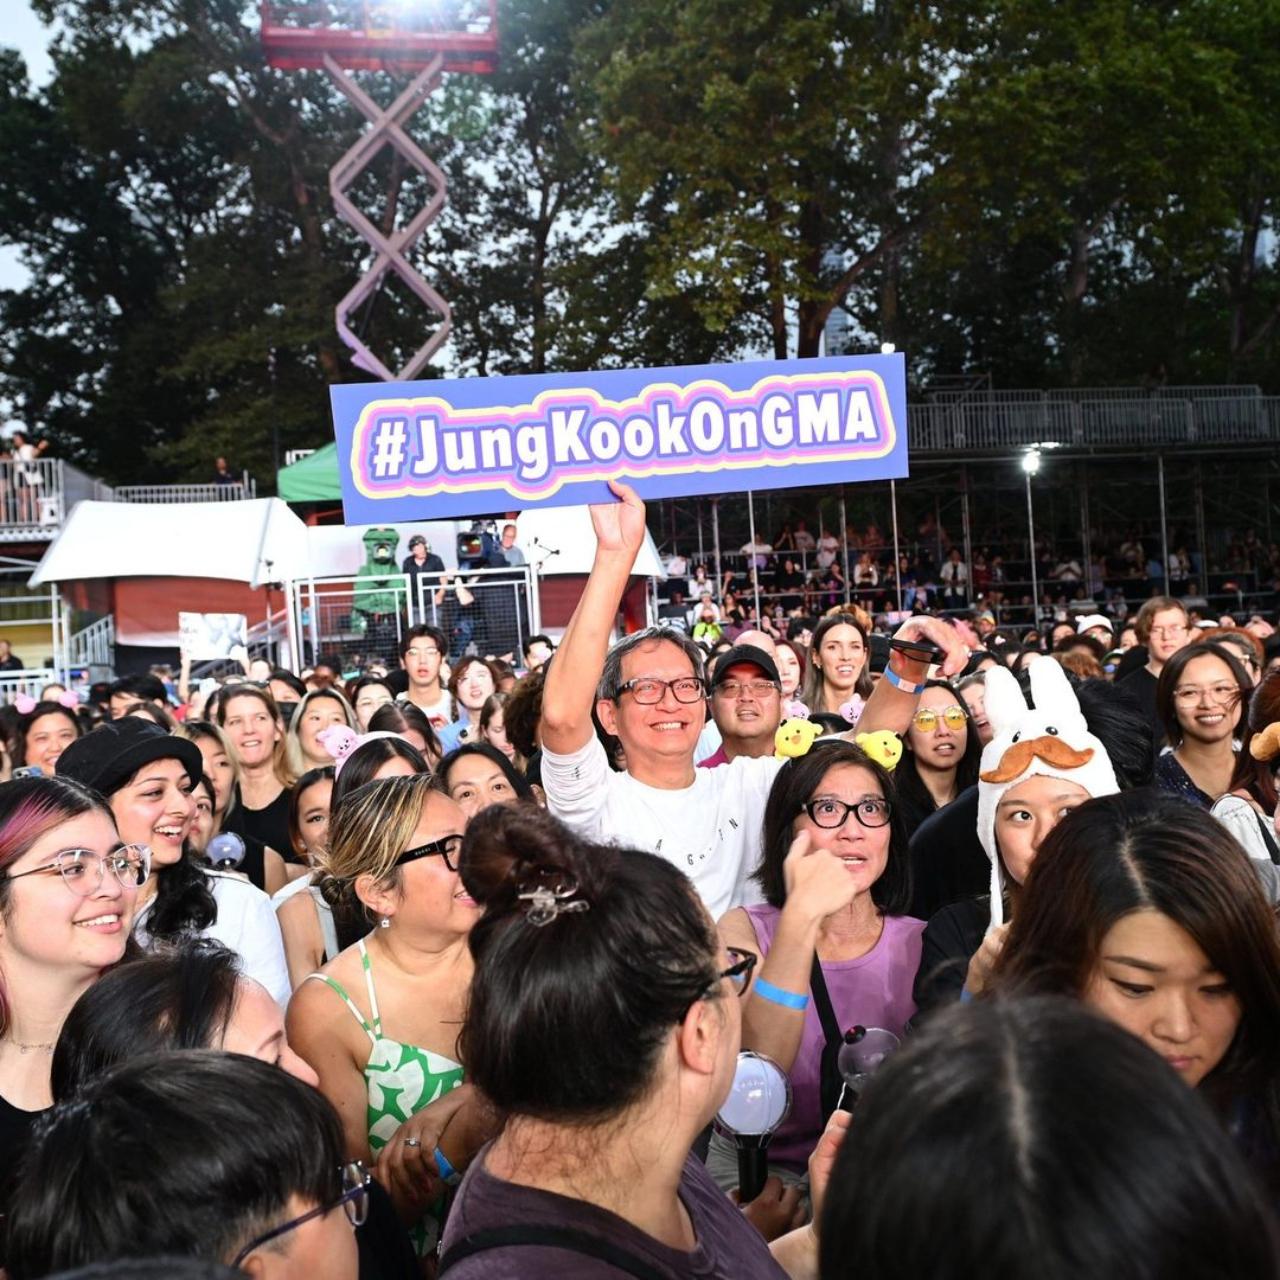 ARMYs of all ages flocked to see the concert with the same unbridled enthusiasm